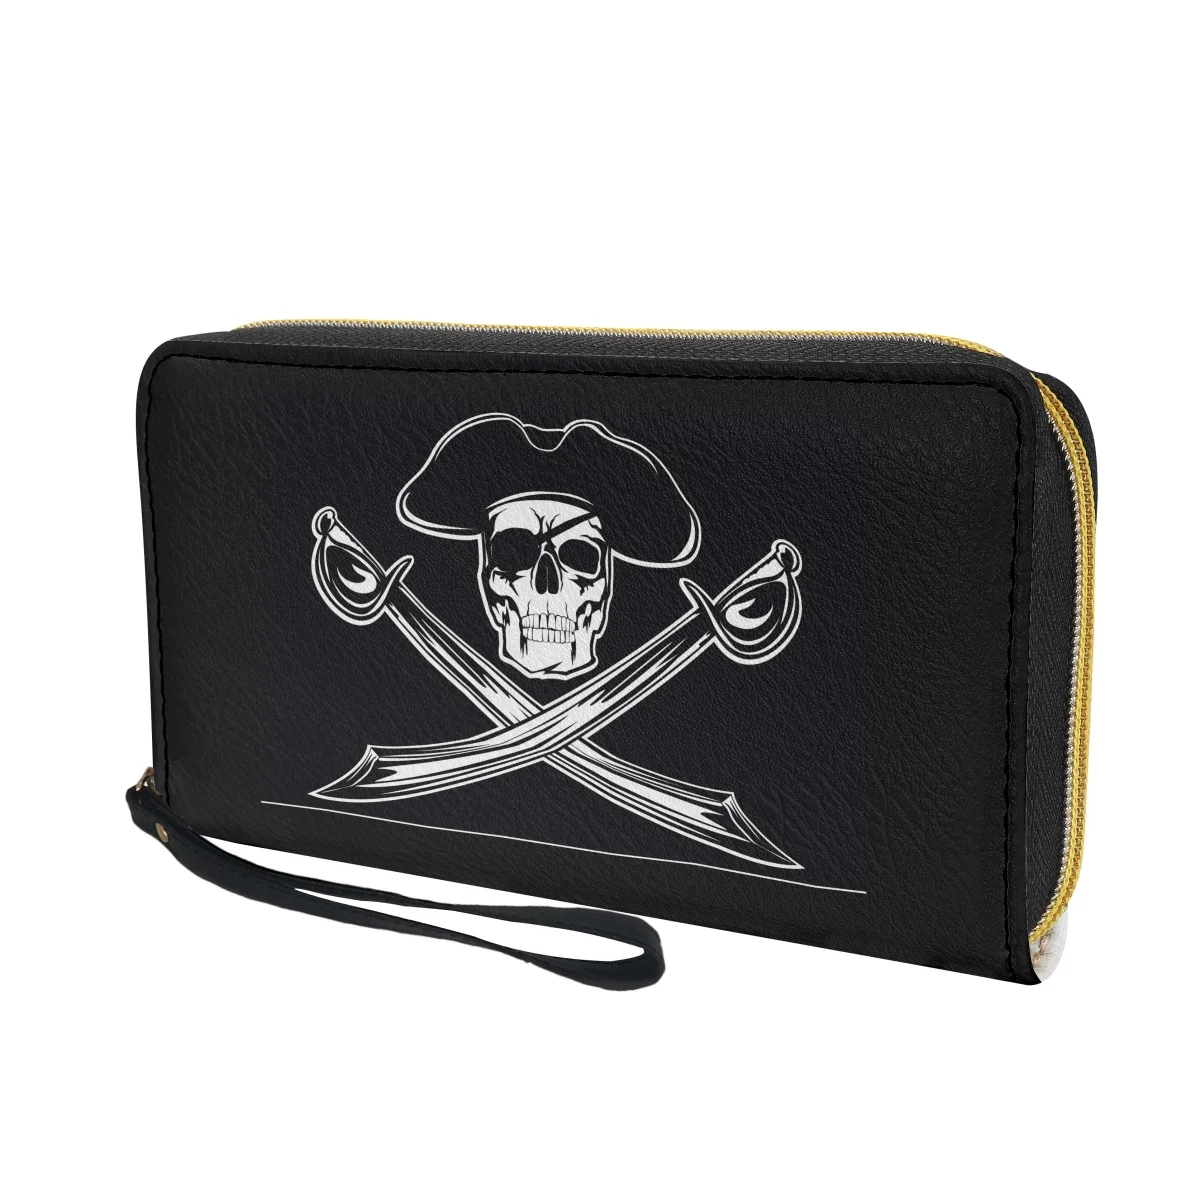 Luxury Brand Wallet Pu Leather Pirate Flag Pattern Wallet Minimalist Wallets With Strap Carteras De Mujer